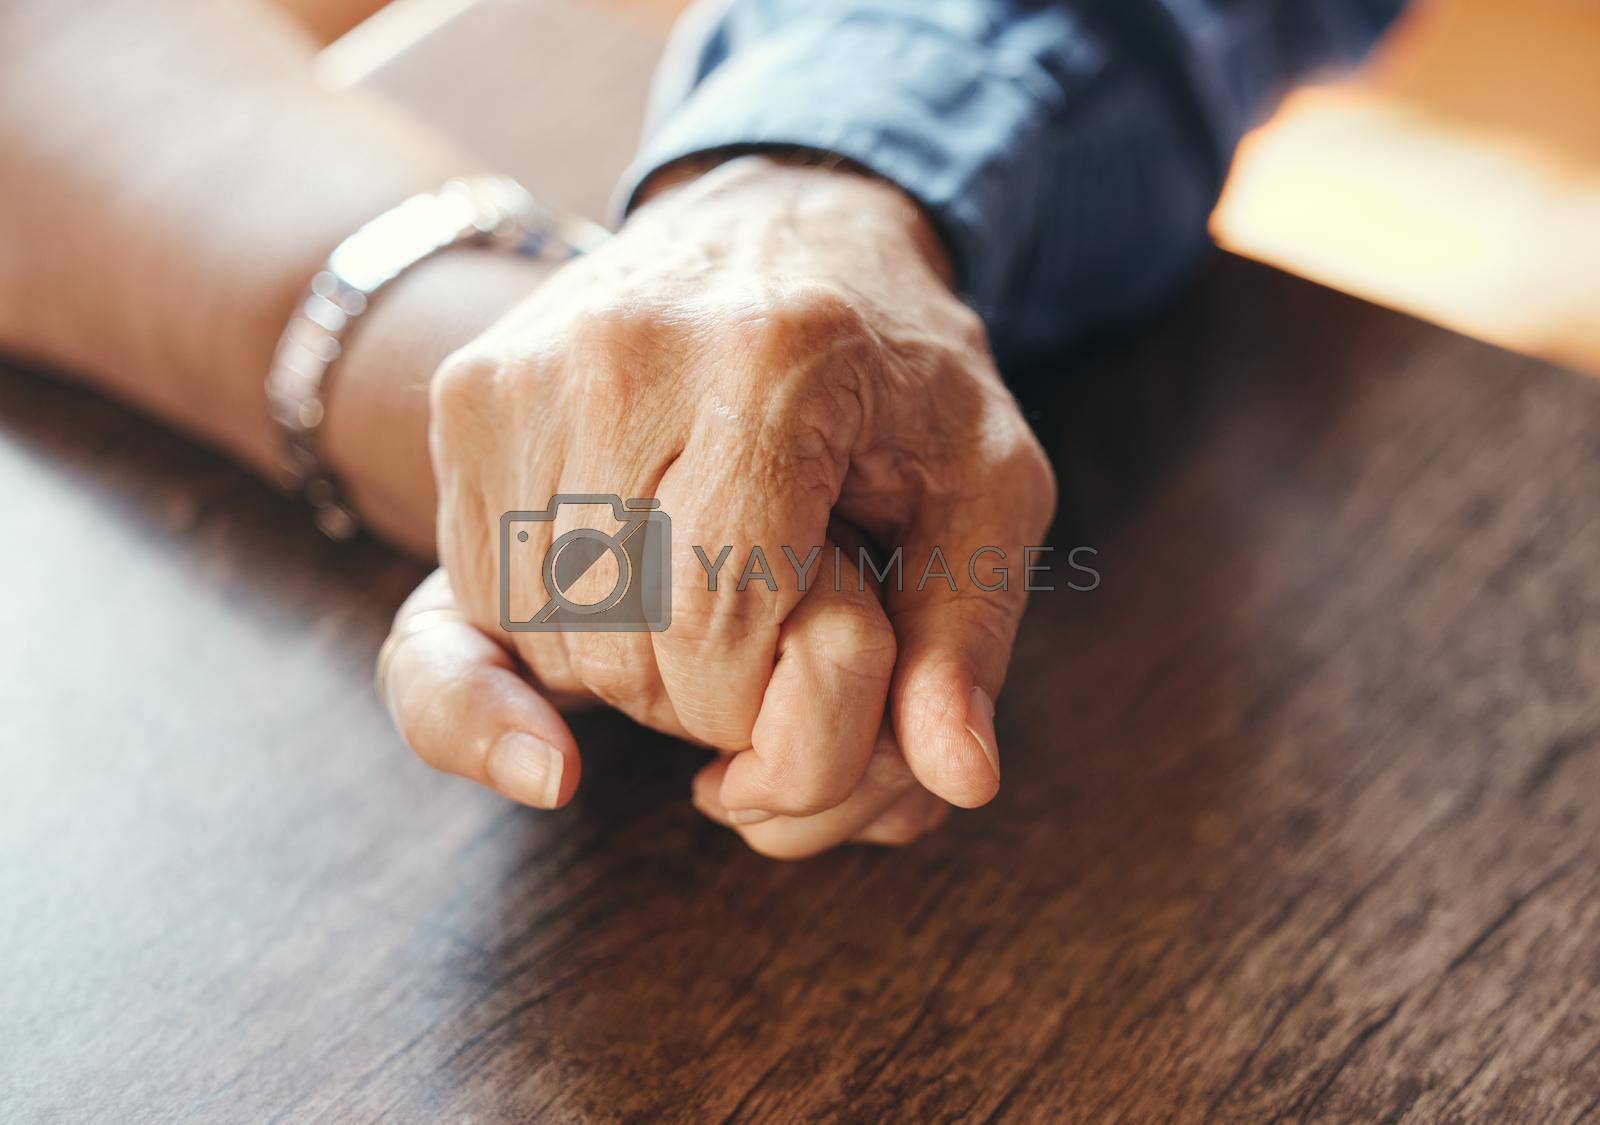 Marriage senior couple holding hands in for support, mental health and care after bad news, results or sick. Love, trust and help with retirement people for depression, family or healthcare problem.